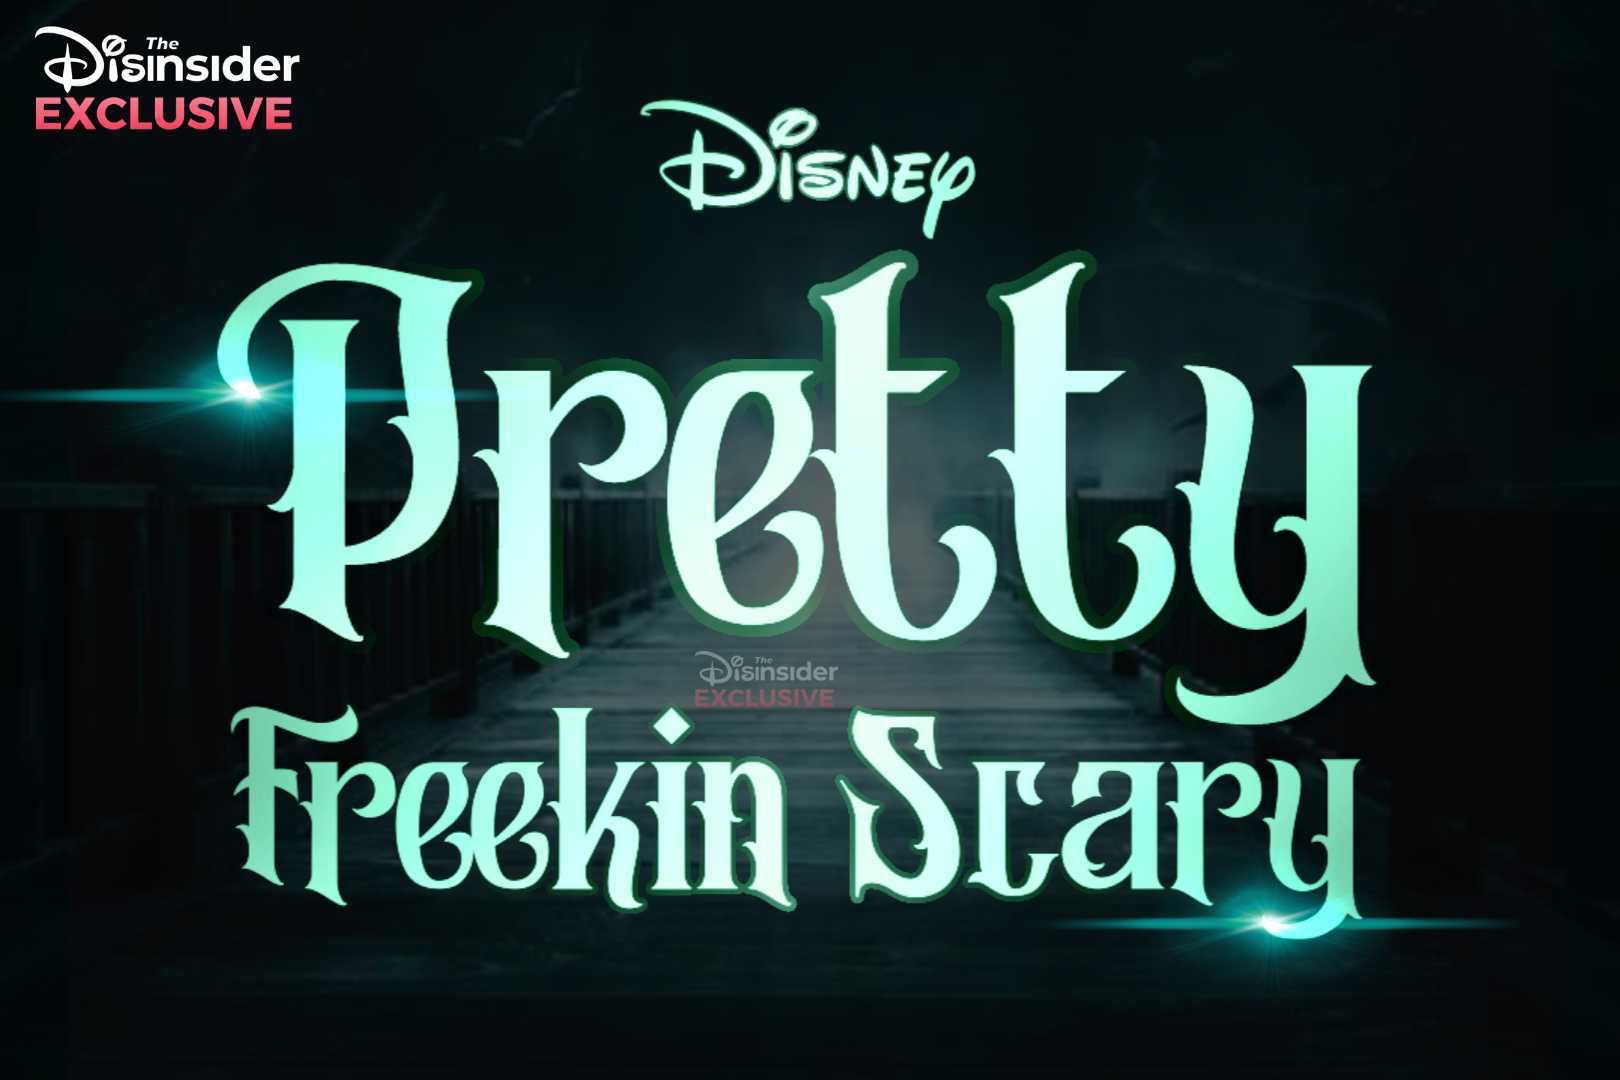 EXCLUSIVE: Popular Book Series ‘Pretty Freekin Scary’ Being Adapted For The Disney Channel